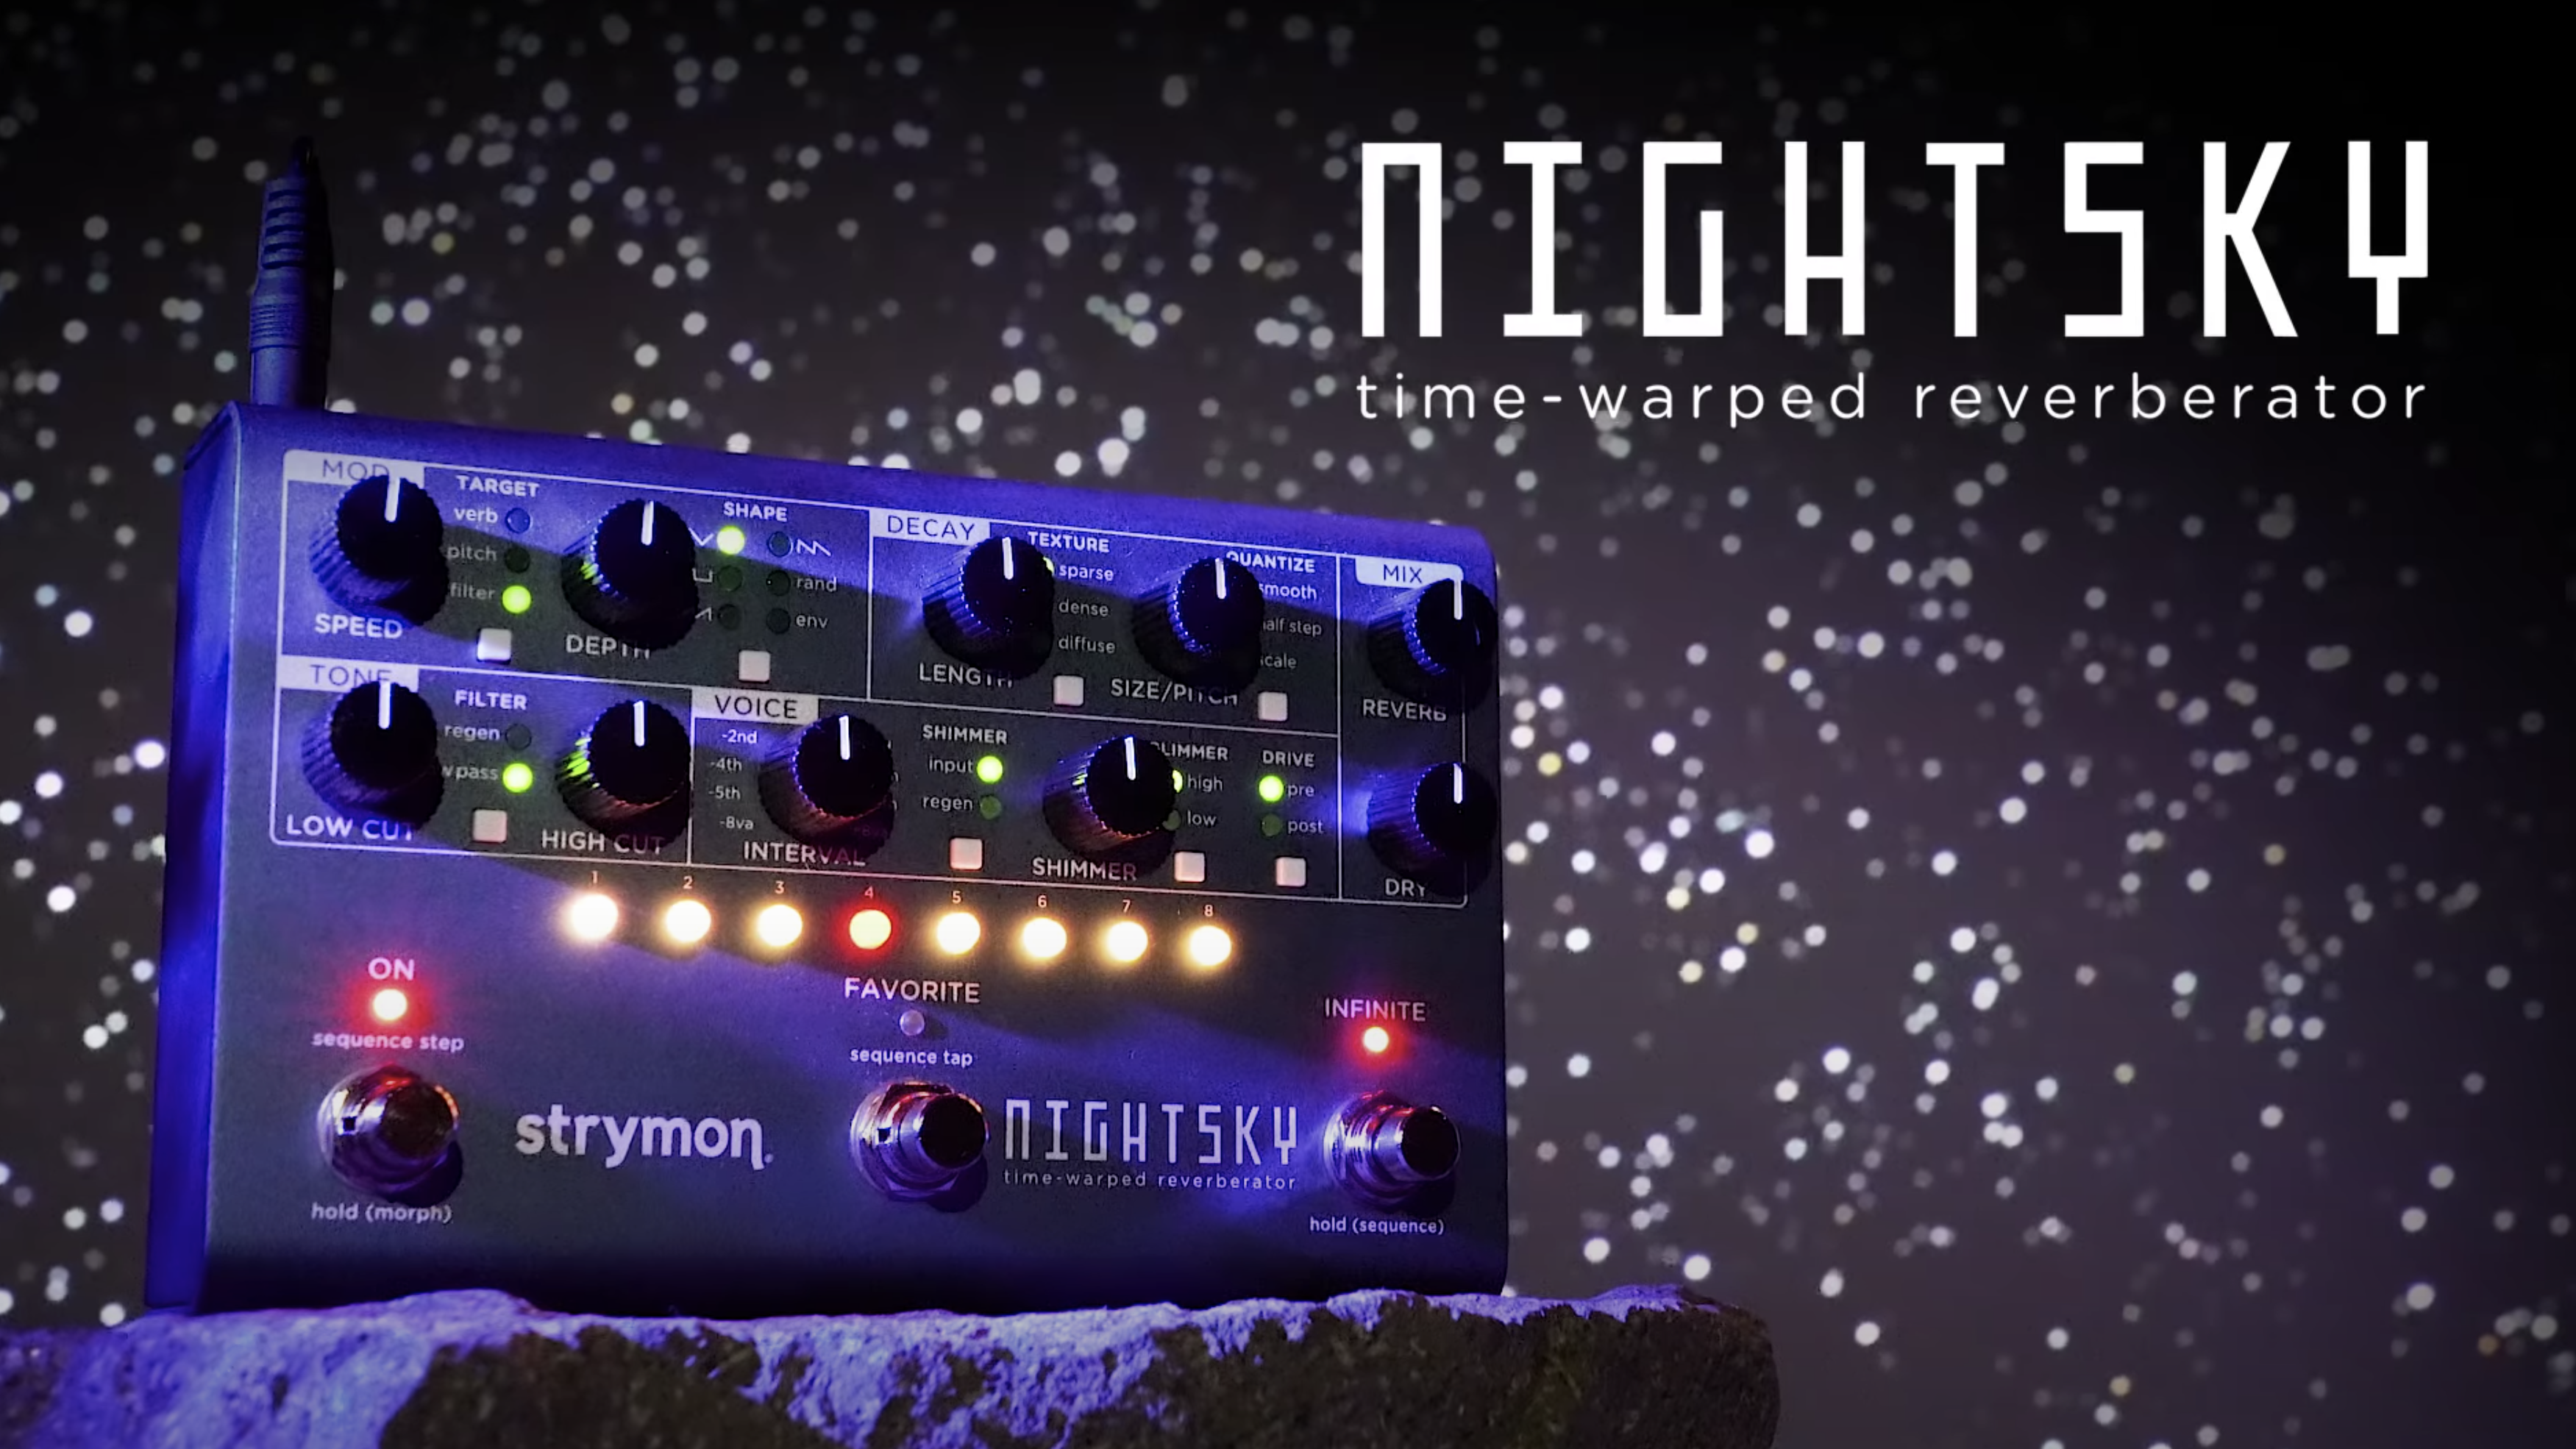 Strymon Nightsky Brings Reverb Pedals To The Next Level